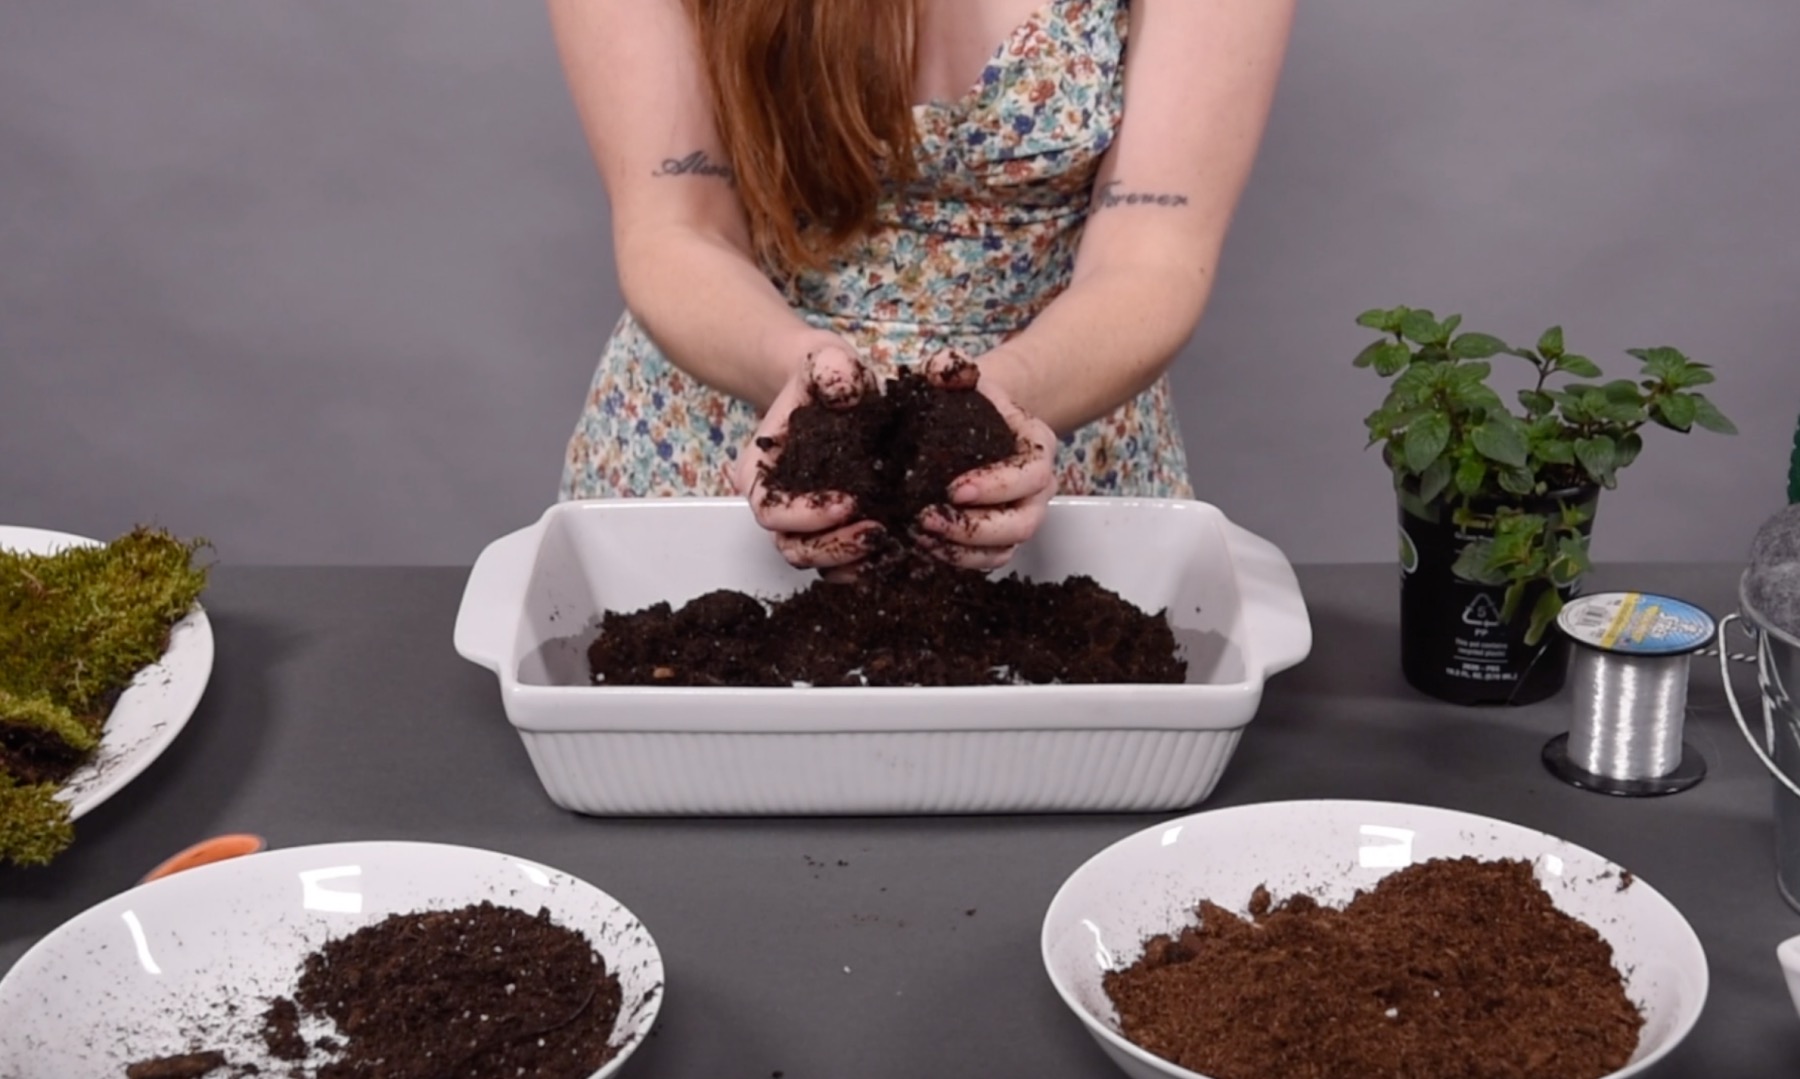 split the mud ball in half and place the plants inside